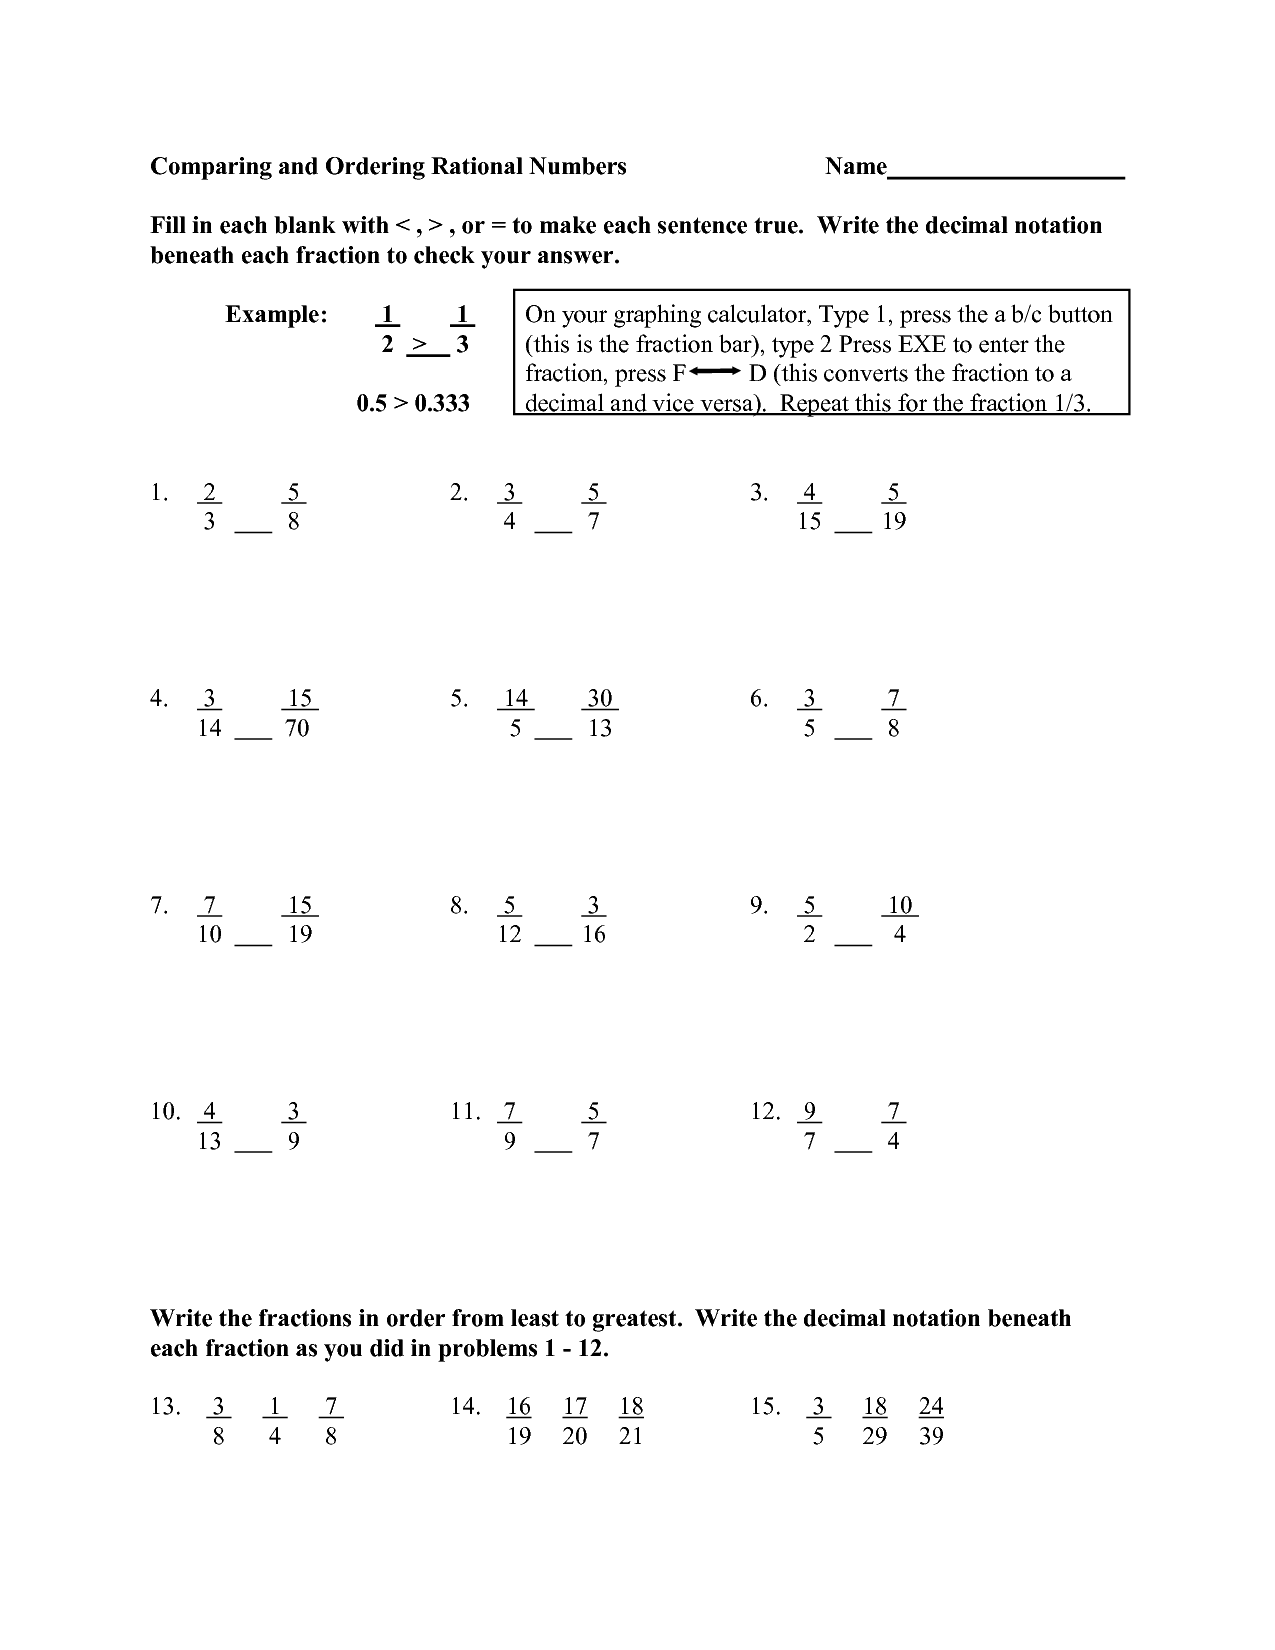 6th Grade Math Comparing And Ordering Rational Numbers Worksheet